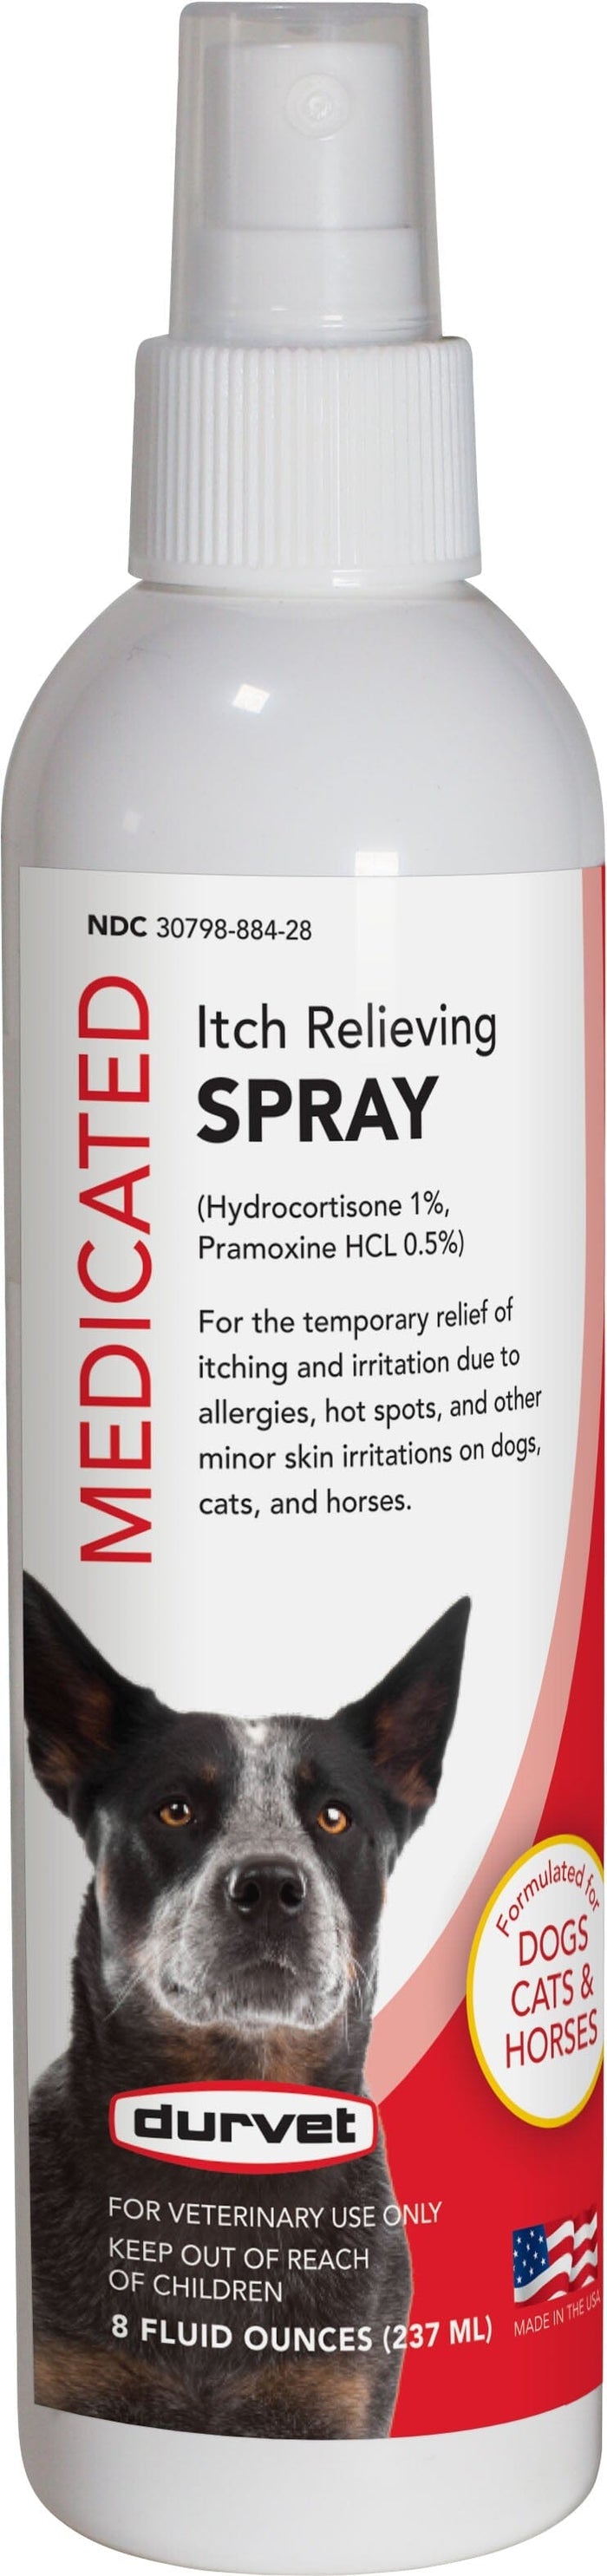 Durvet Itch Relieving Spray for Dogs - 8 Oz